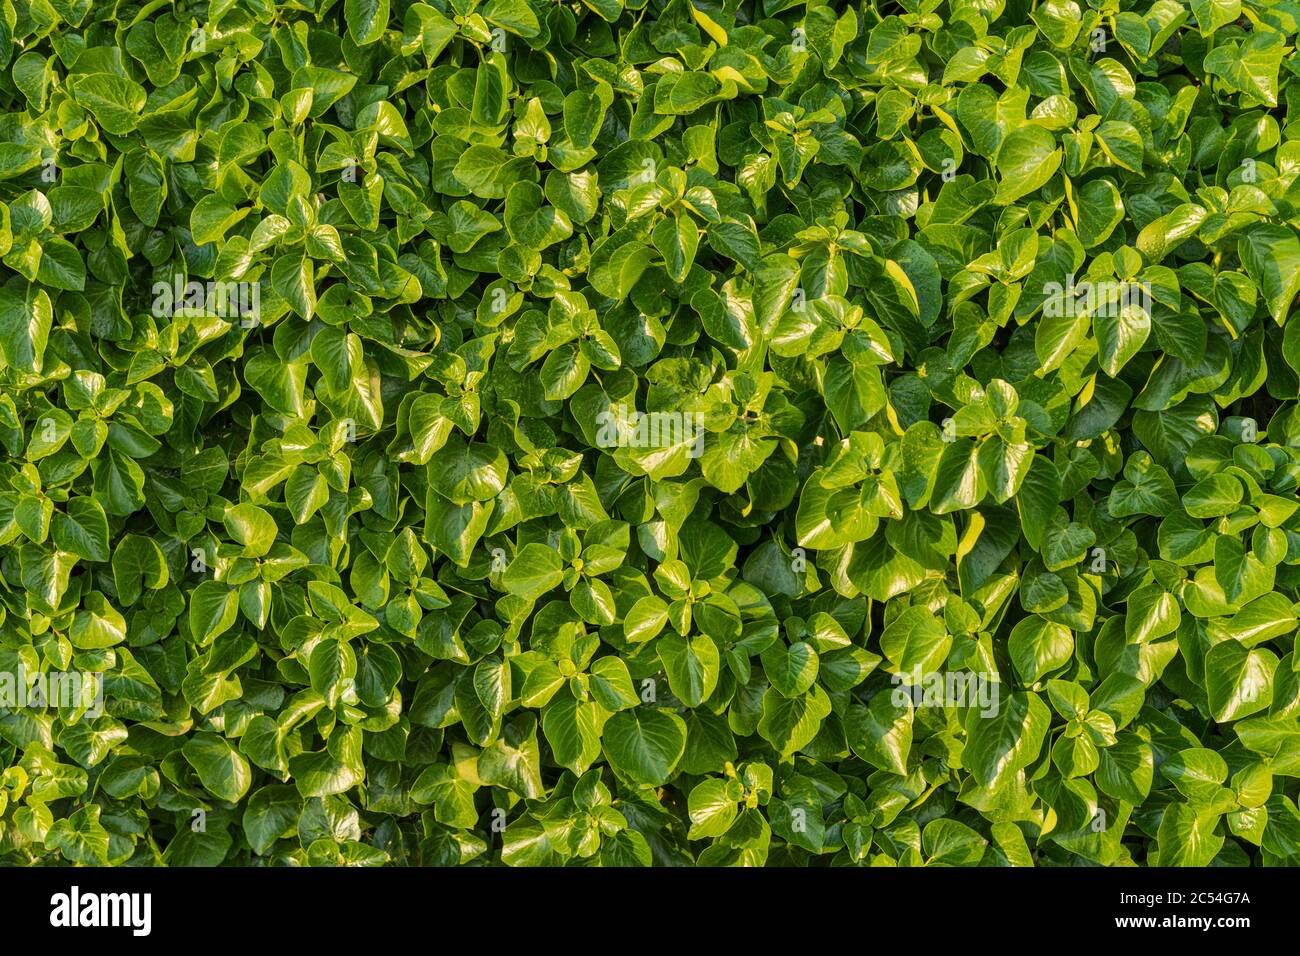 View on the leafs creating interesting pattern Stock Photo